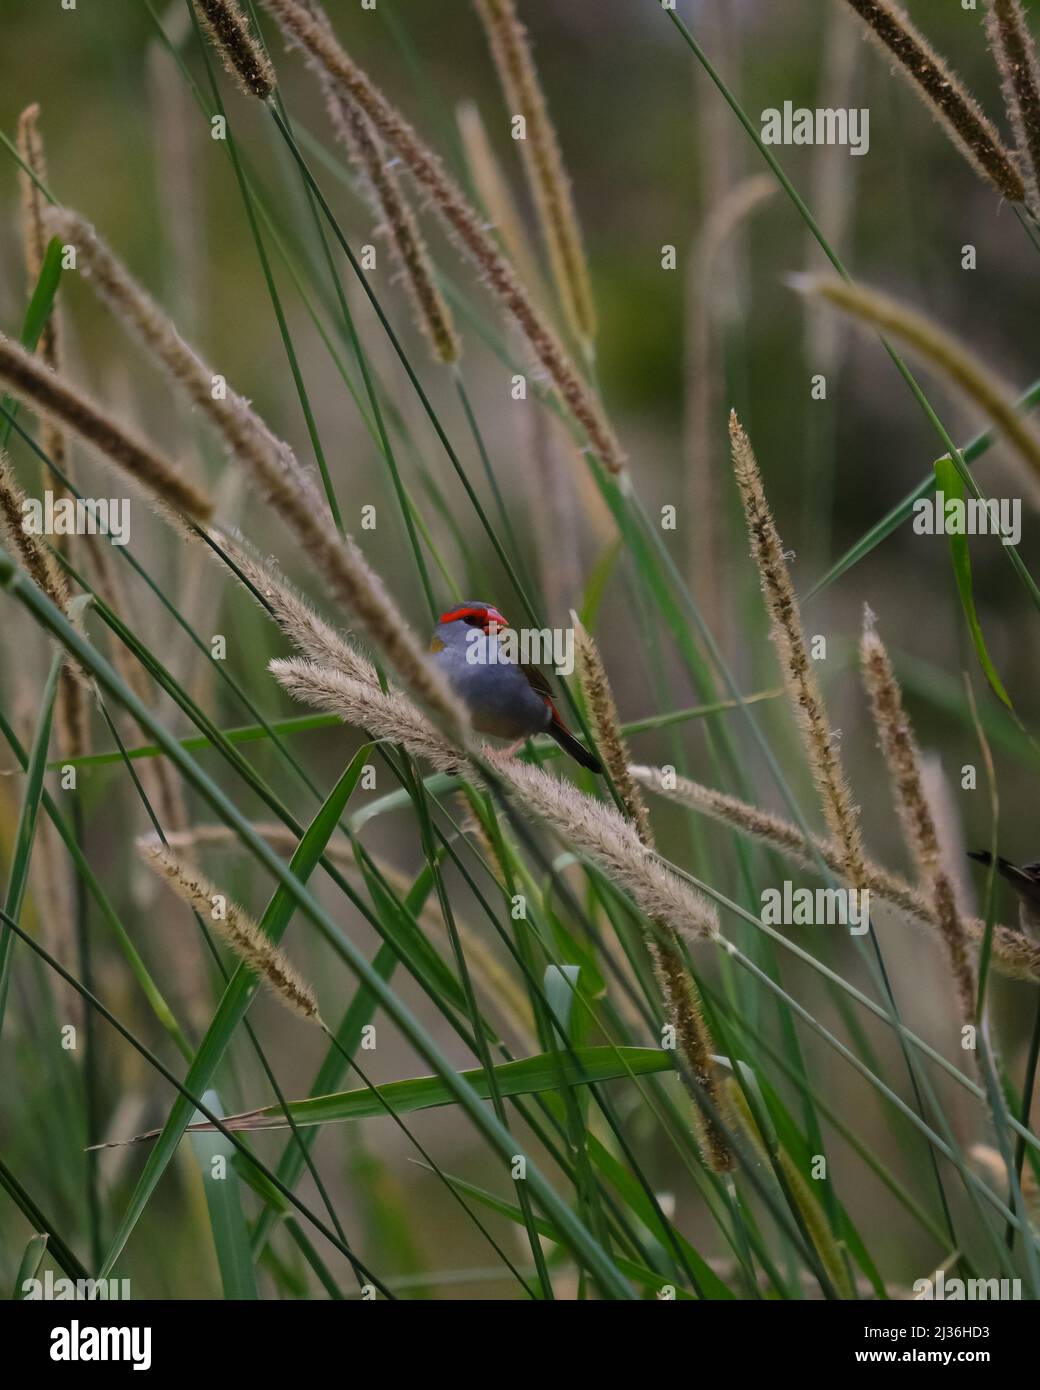 A vertical close-up shot of a red-browed Astrild sitting on a sedge stalk. Stock Photo